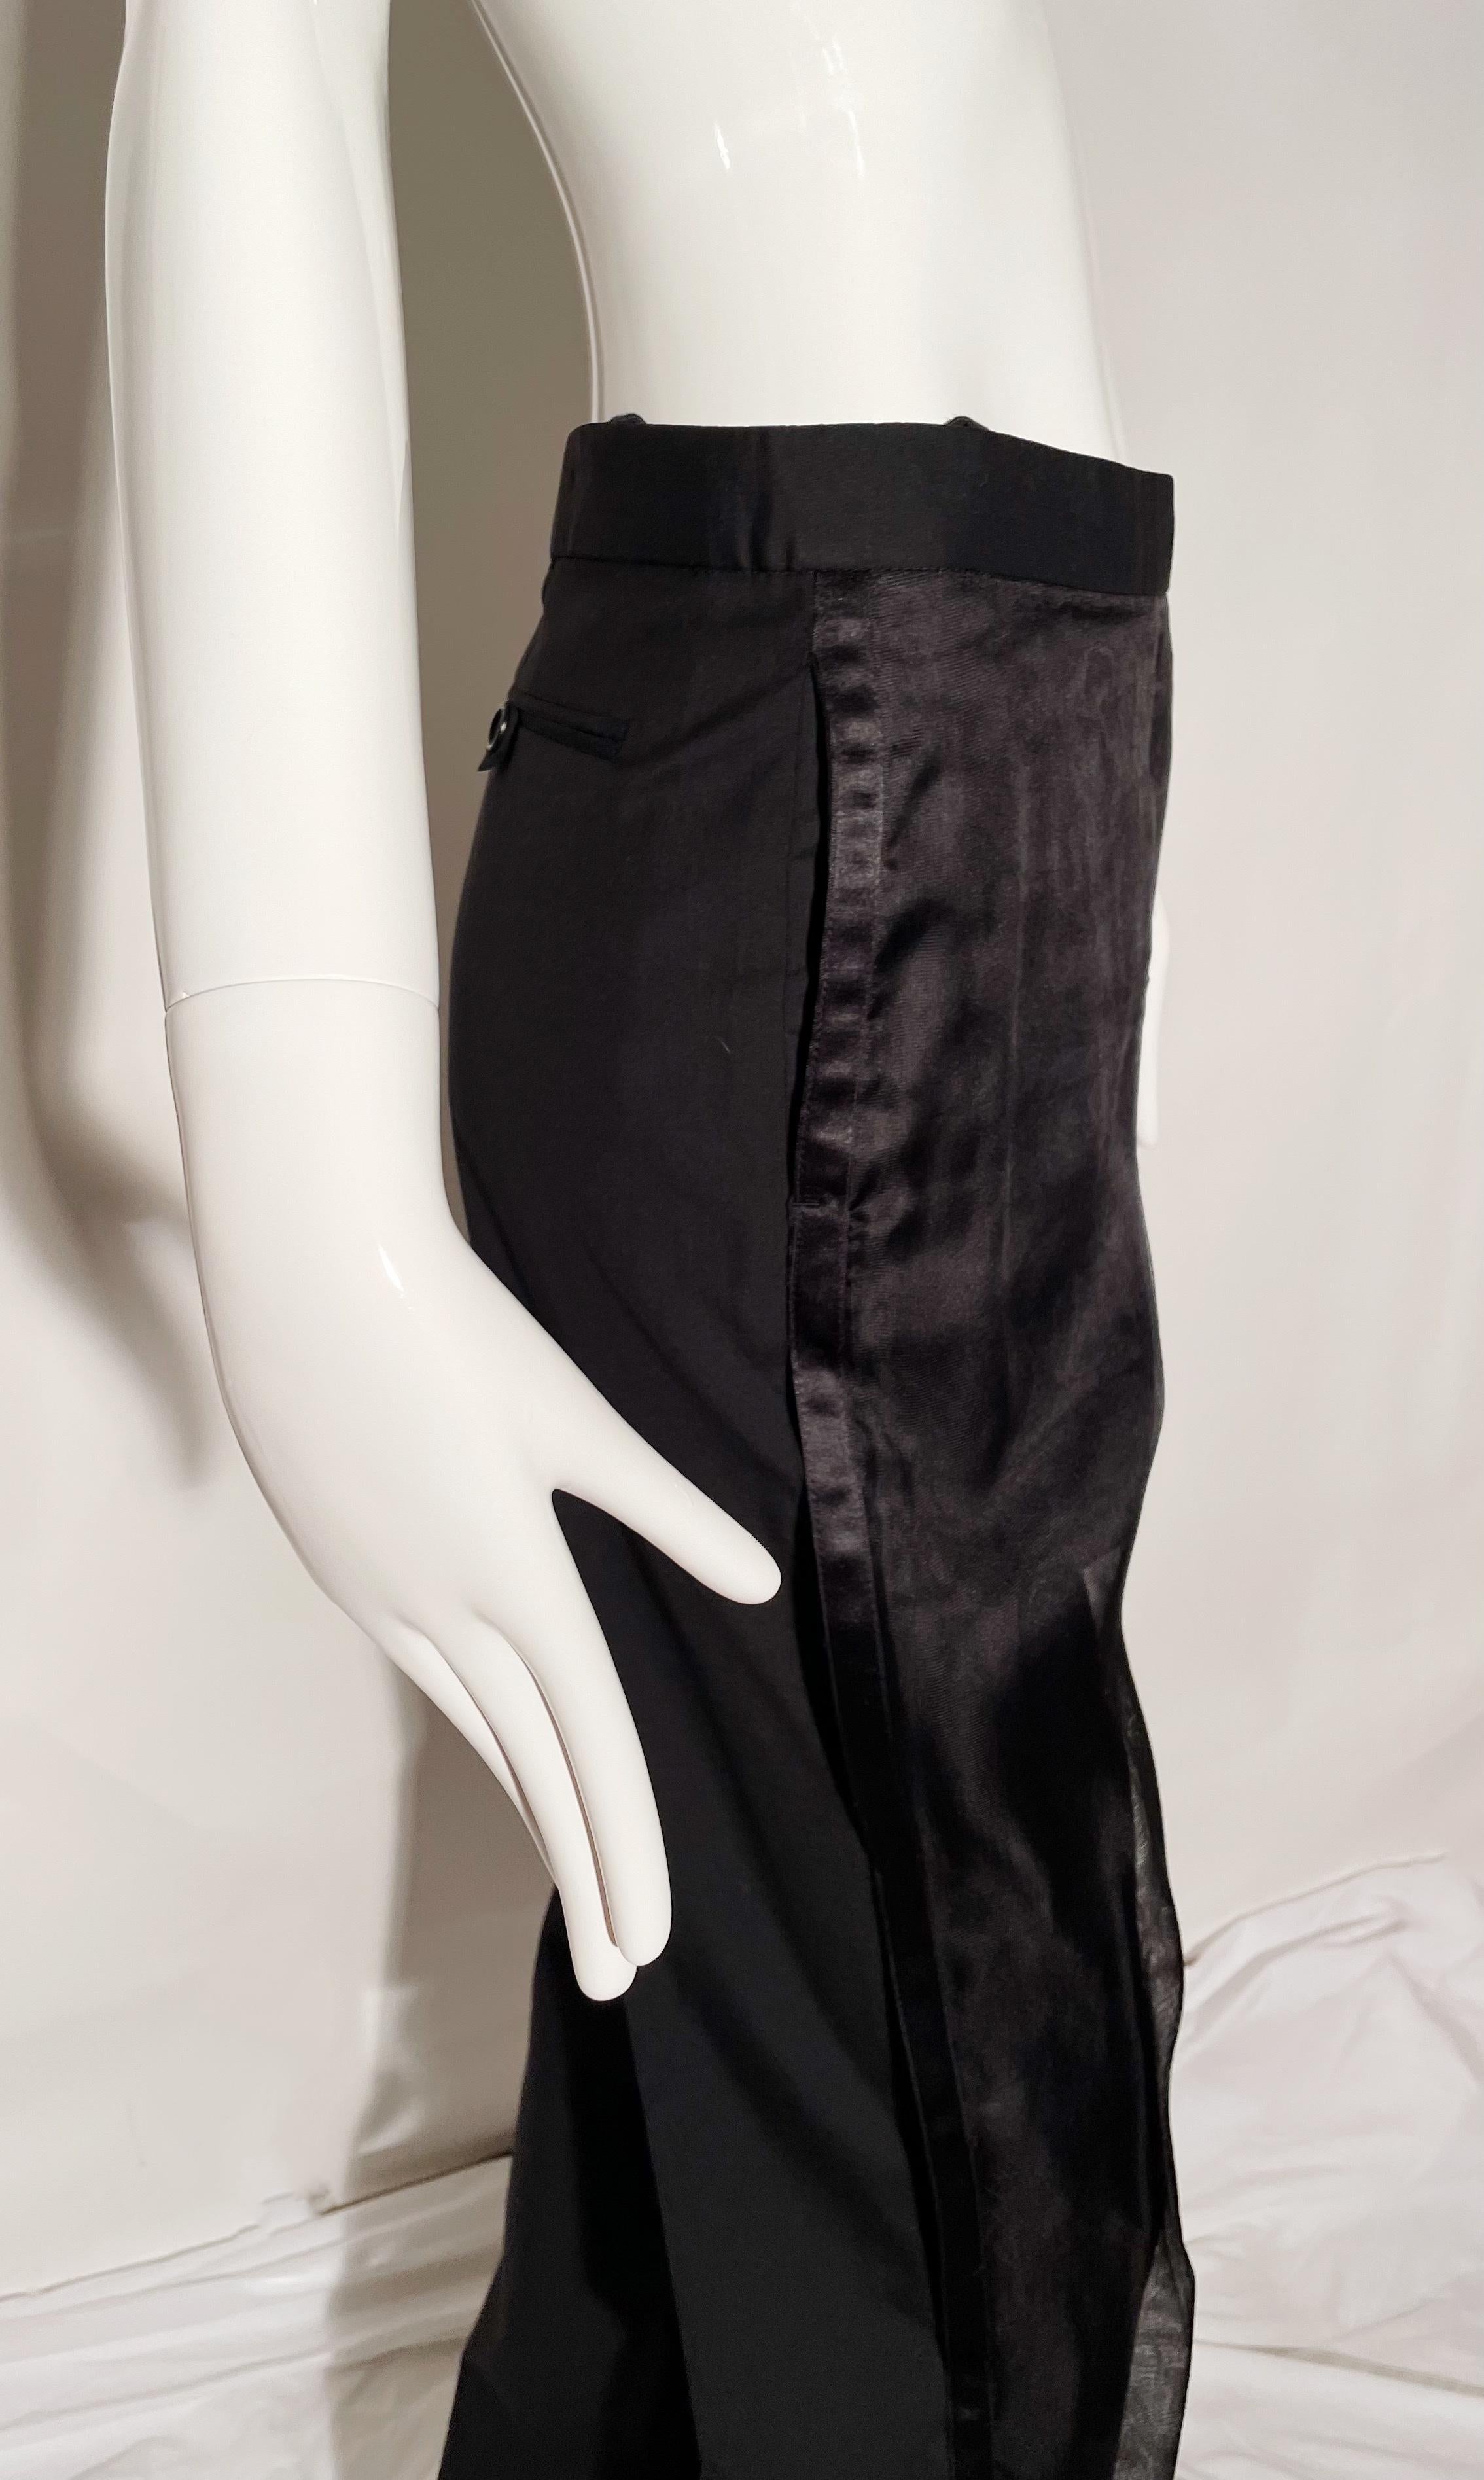 Helmut Lang Tuxedo Trouser Mesh Overlay In Excellent Condition For Sale In Los Angeles, CA